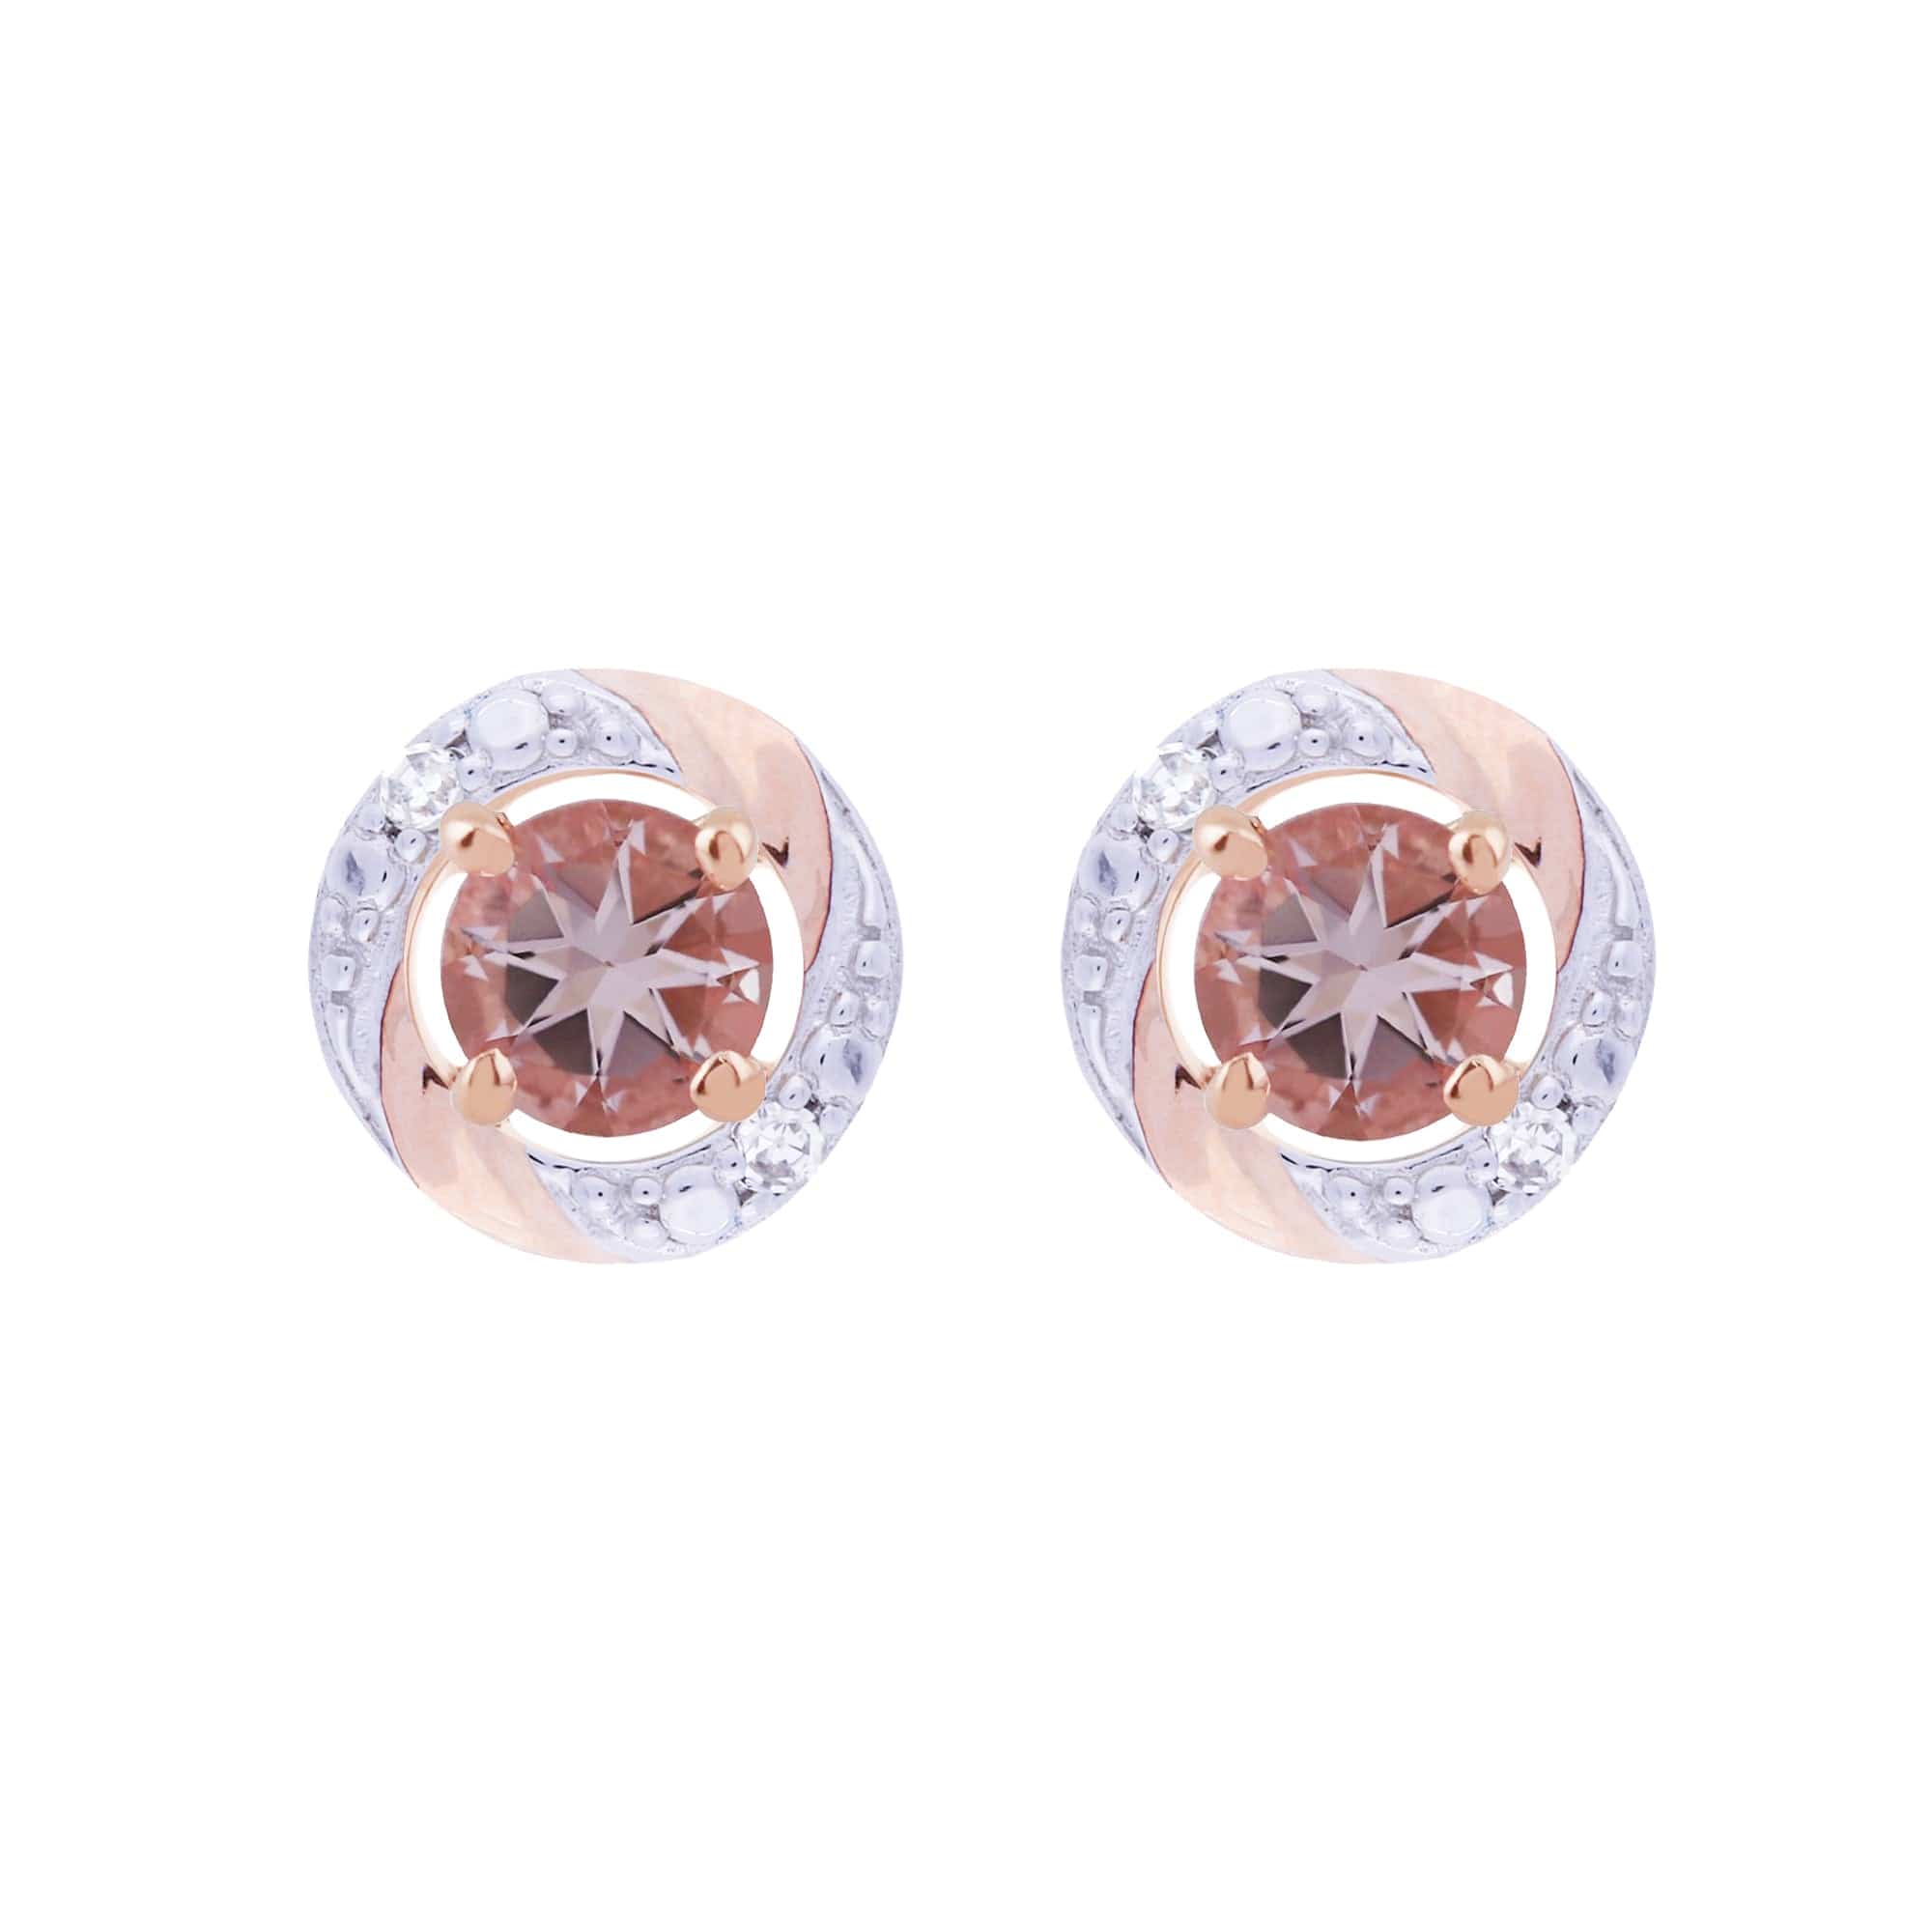 Classic Round Morganite Stud Earrings with Detachable Diamond Round Earrings Jacket Set in 9ct Rose Gold - Gemondo